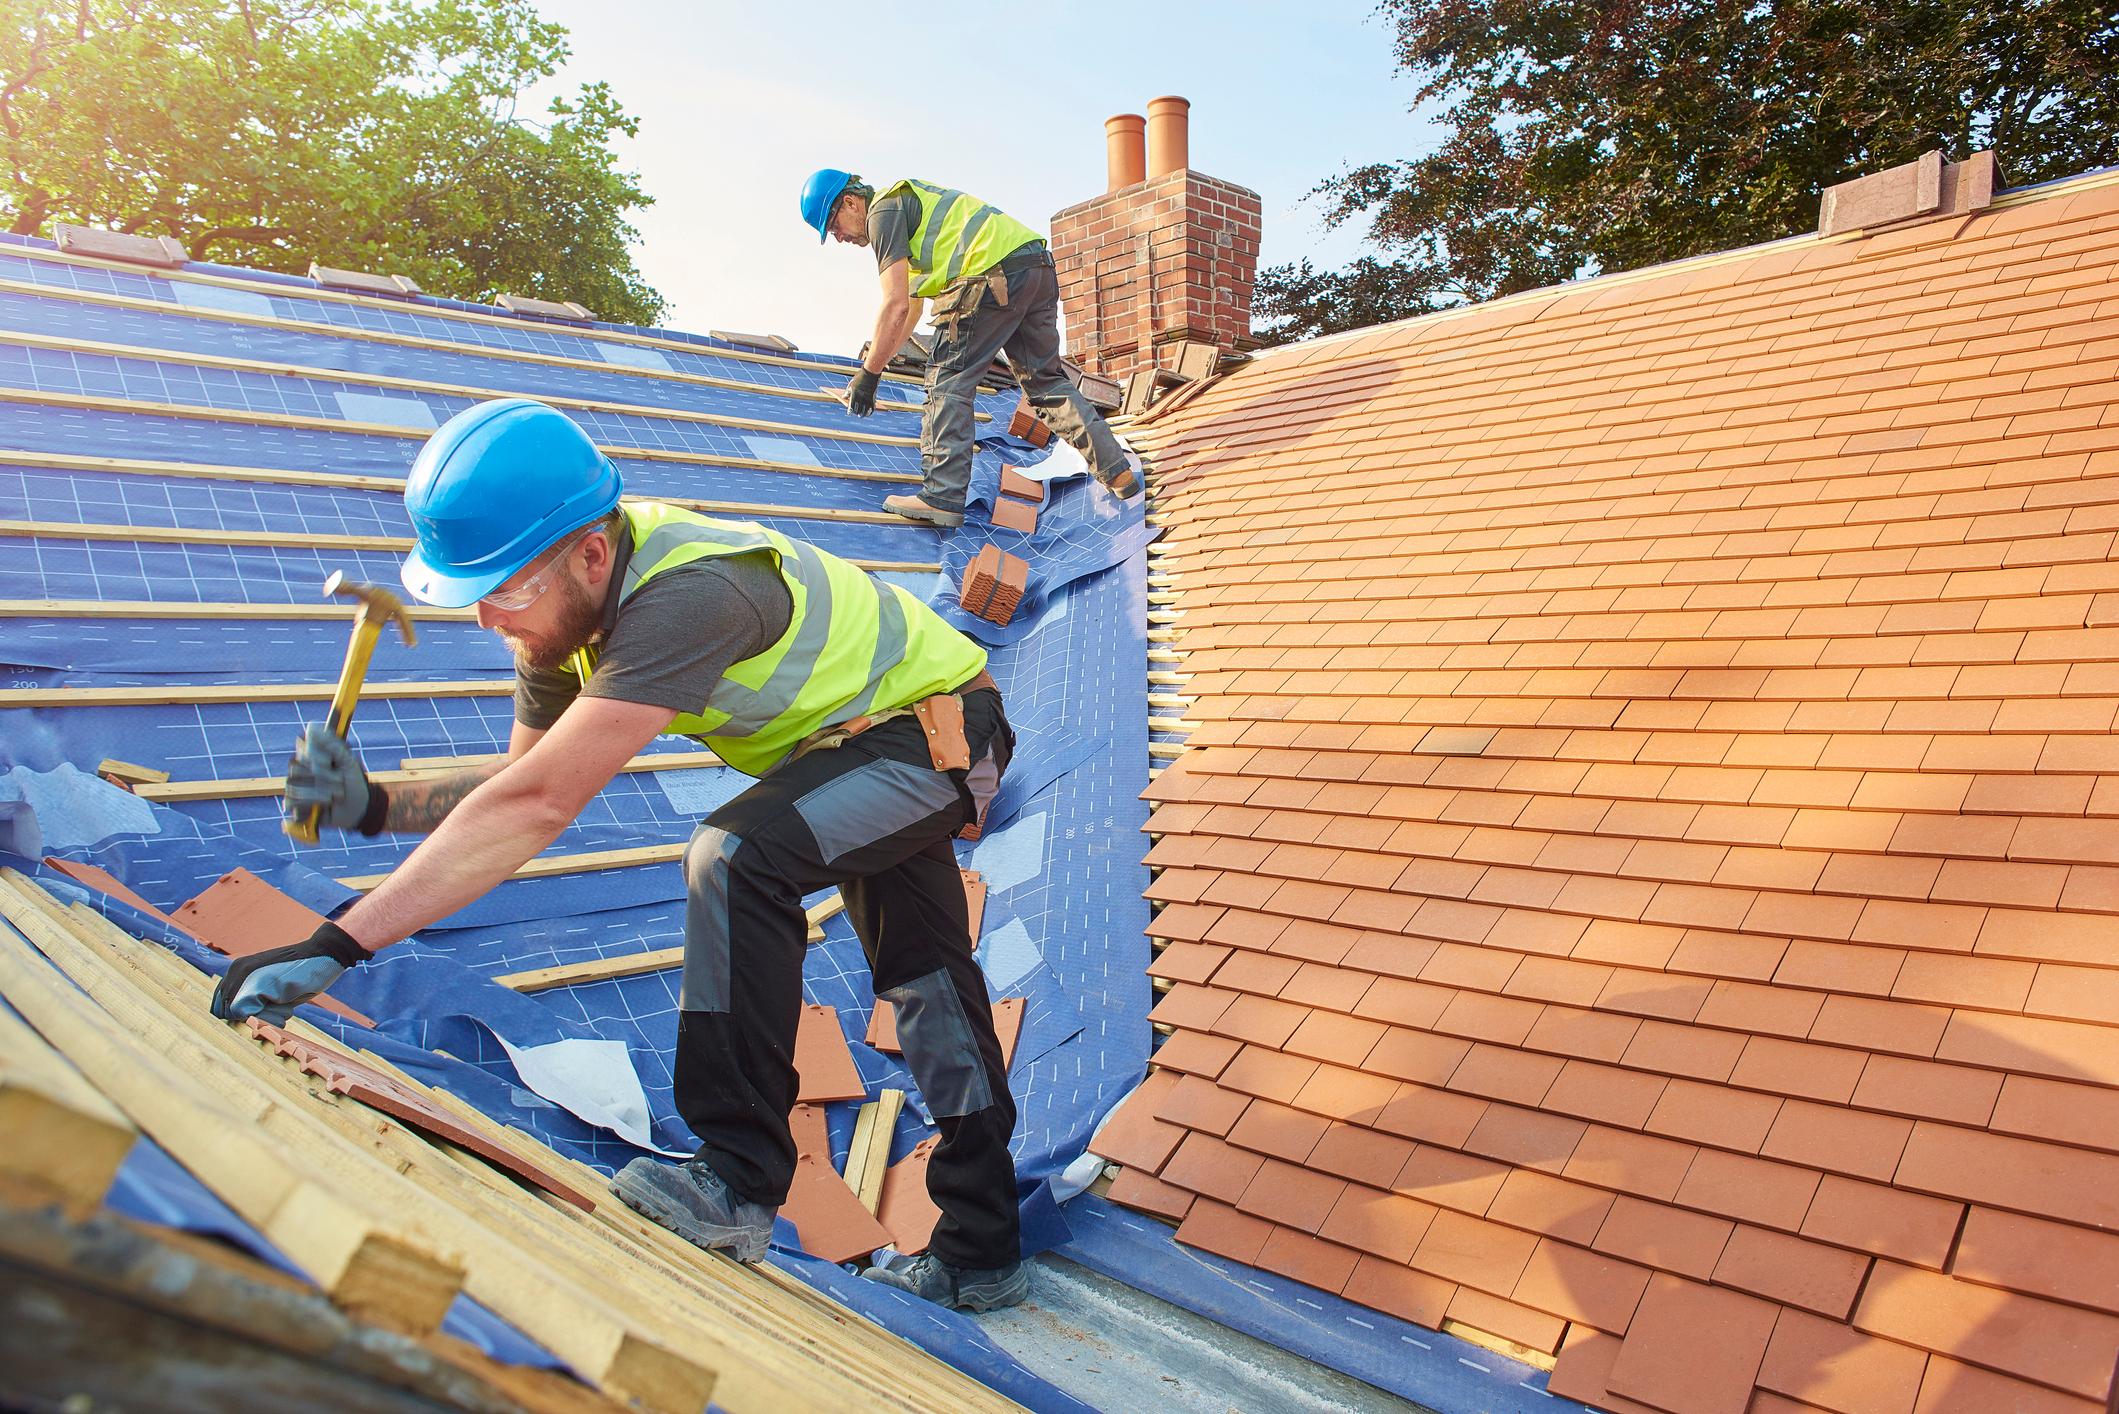 Two roofers constructing a roof.